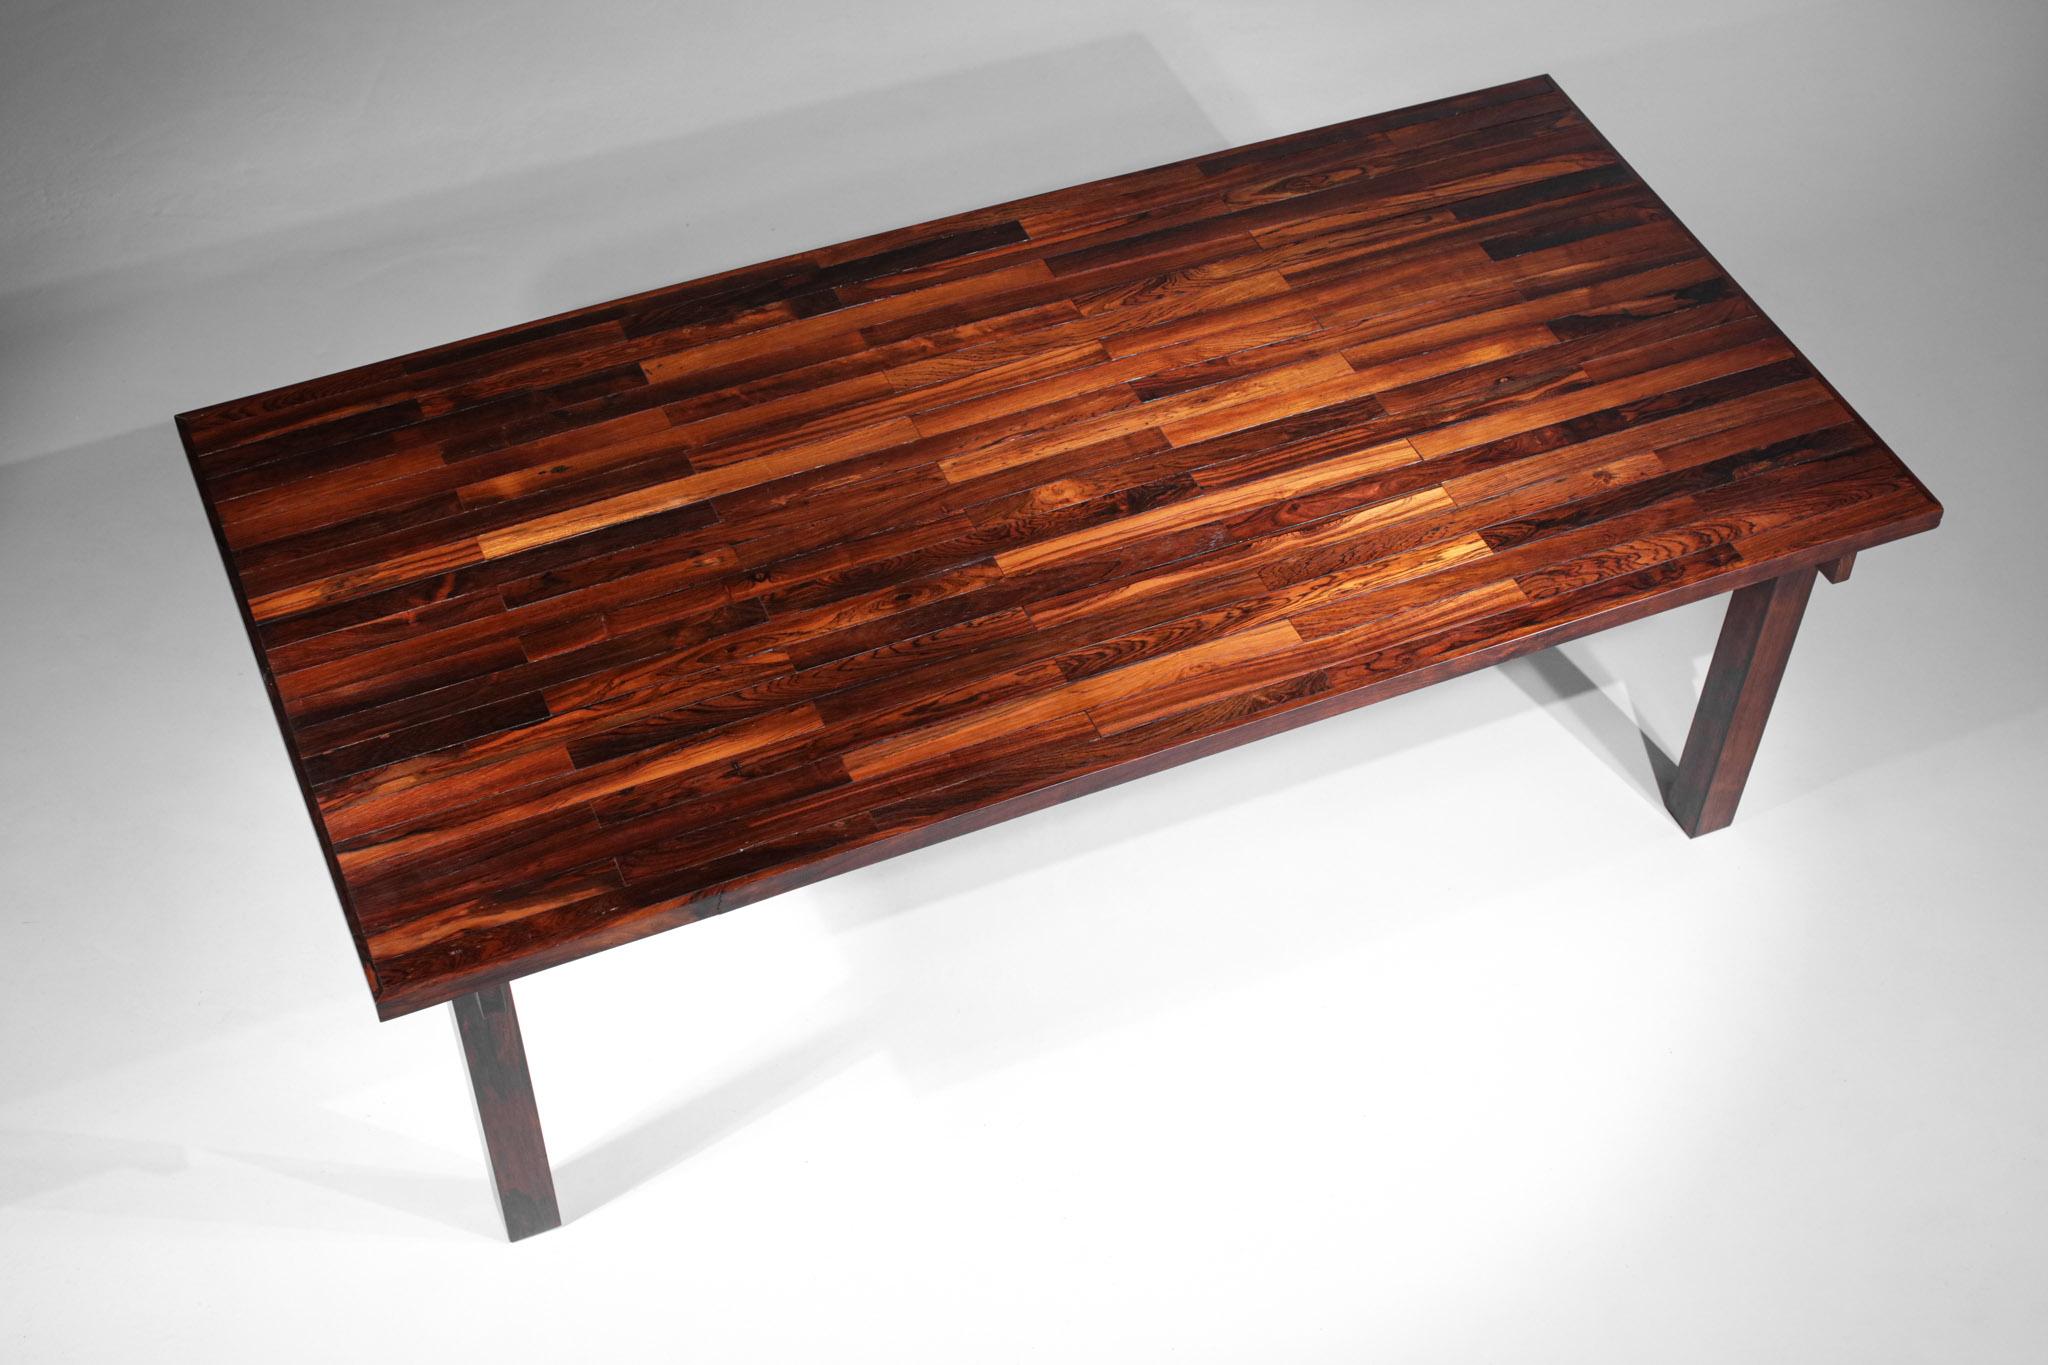 Large Brazilian Dining Table in Solid Wood Style Joachim Tenreiro, 1960's For Sale 7